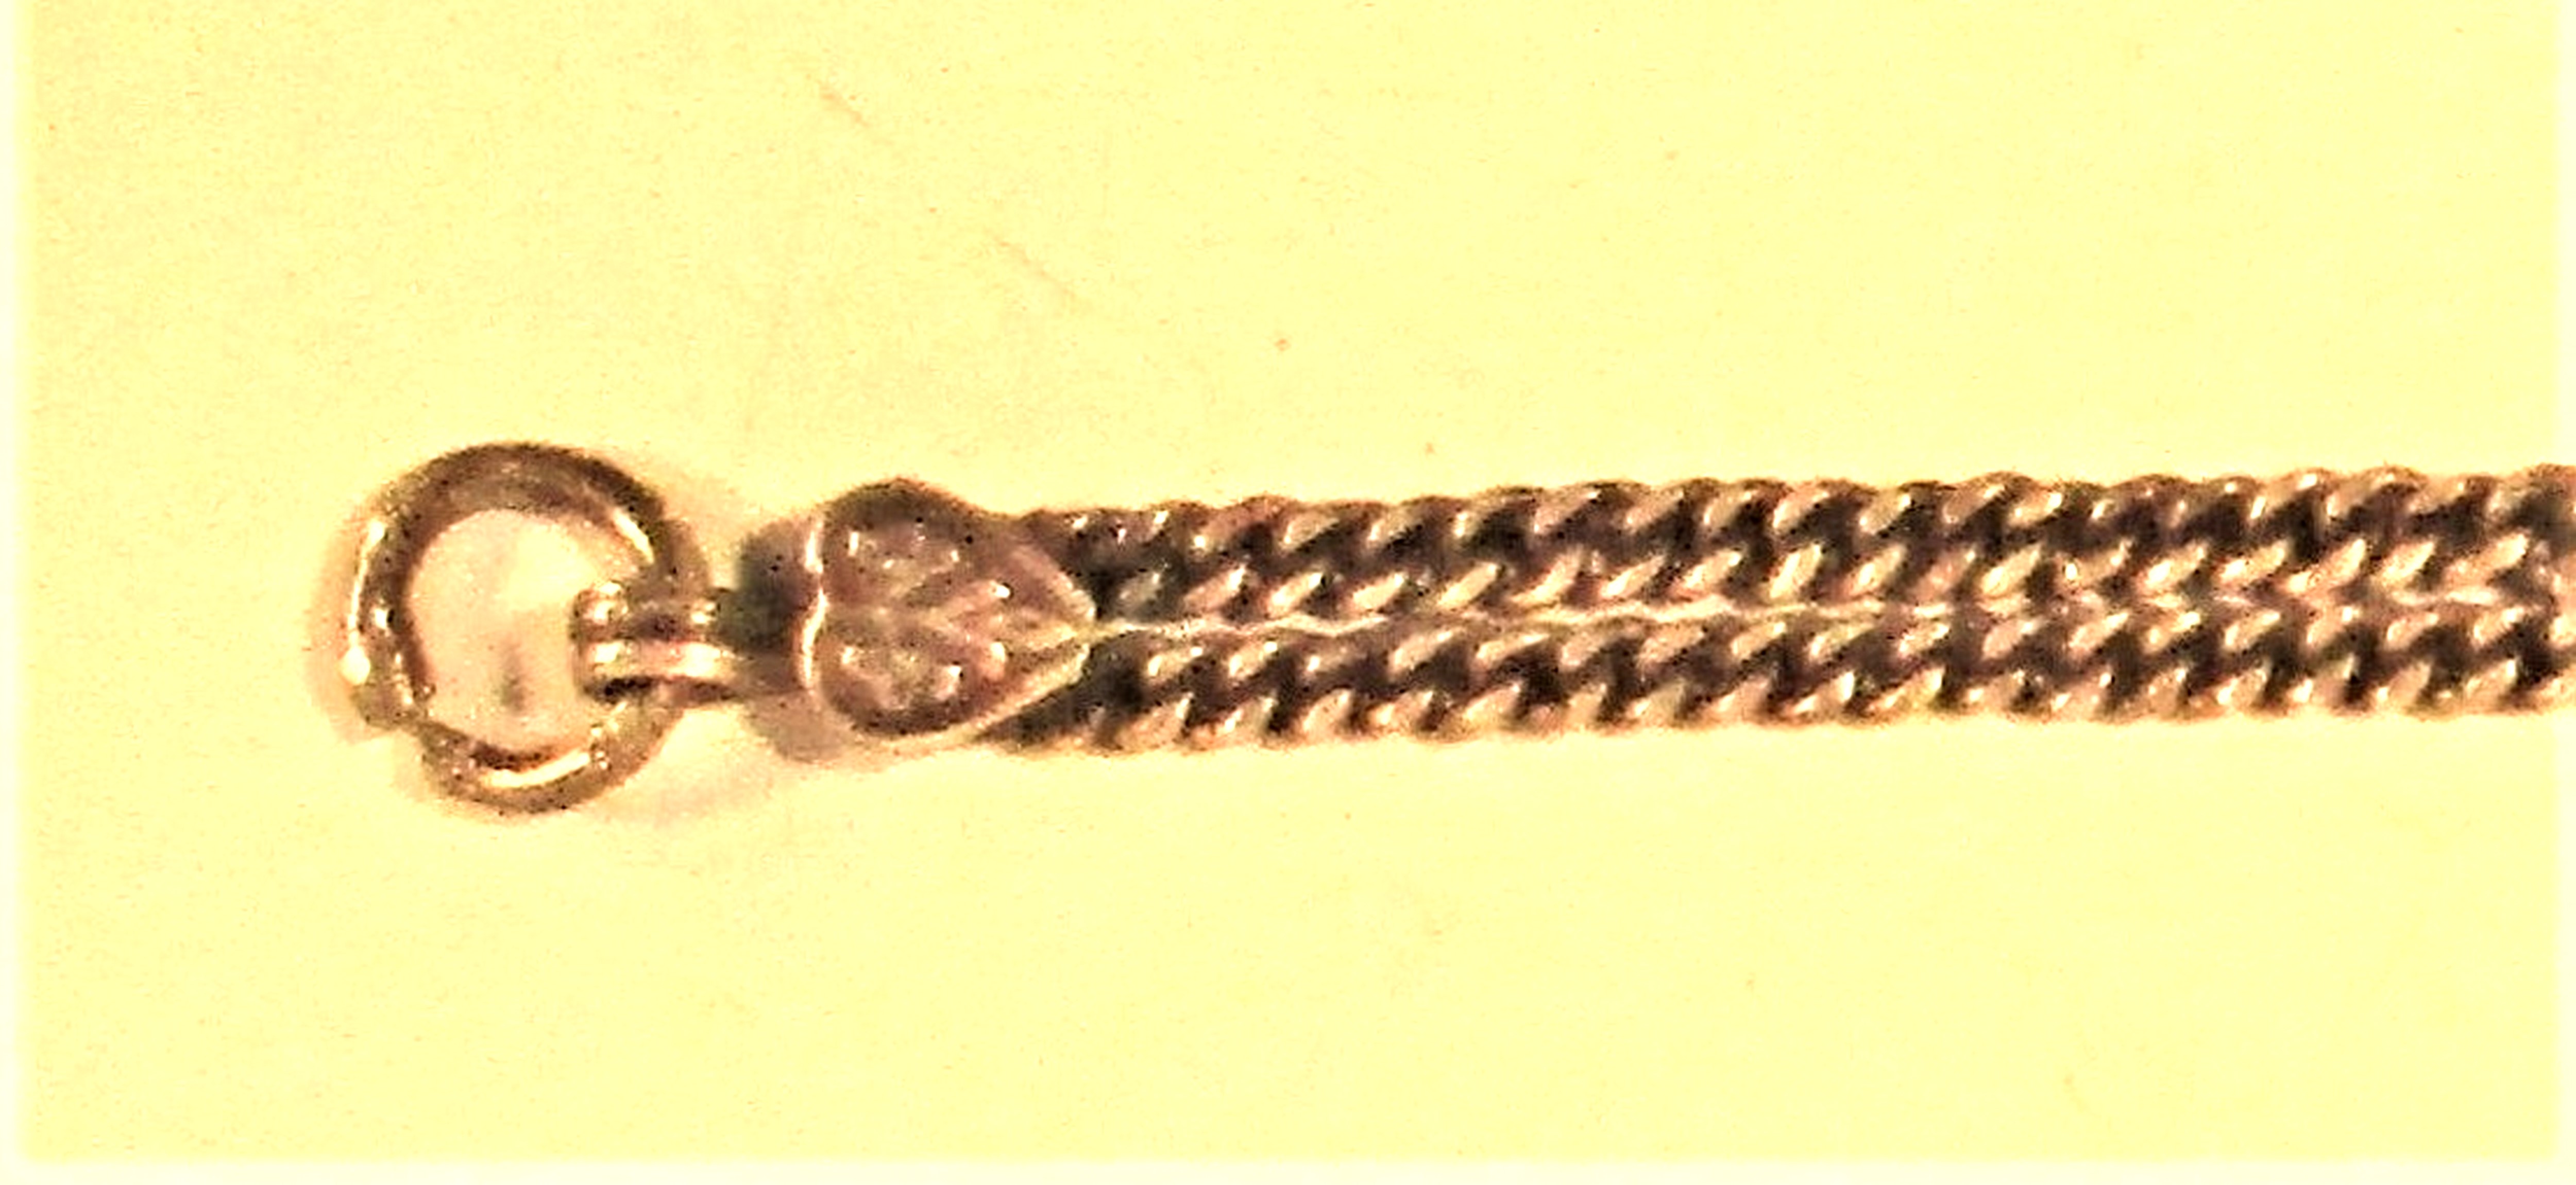 Bracelet made from 2 metal chains and 4 heart motifs. 9cm. - Image 2 of 2